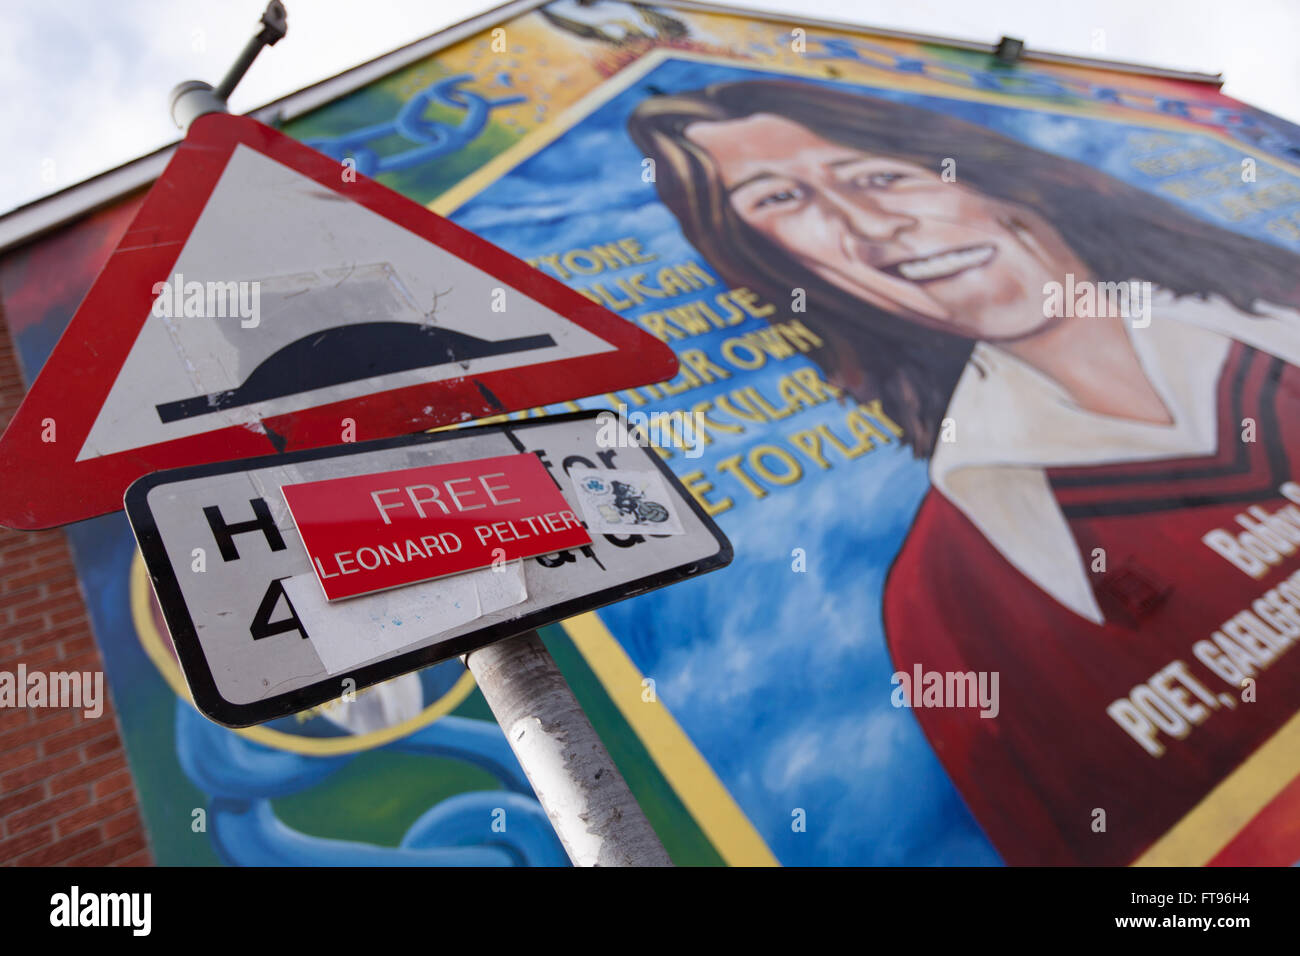 West Belfast, Ireland. 25th March, 2016. A free Leonard Peltier attached to a lampost in West Belfast. with a mural of Bobby Sands in the background this is in Preparation for the Commemoration of the 100th Anniversary of the Easter Rising Credit:  Bonzo/Alamy Live News Stock Photo